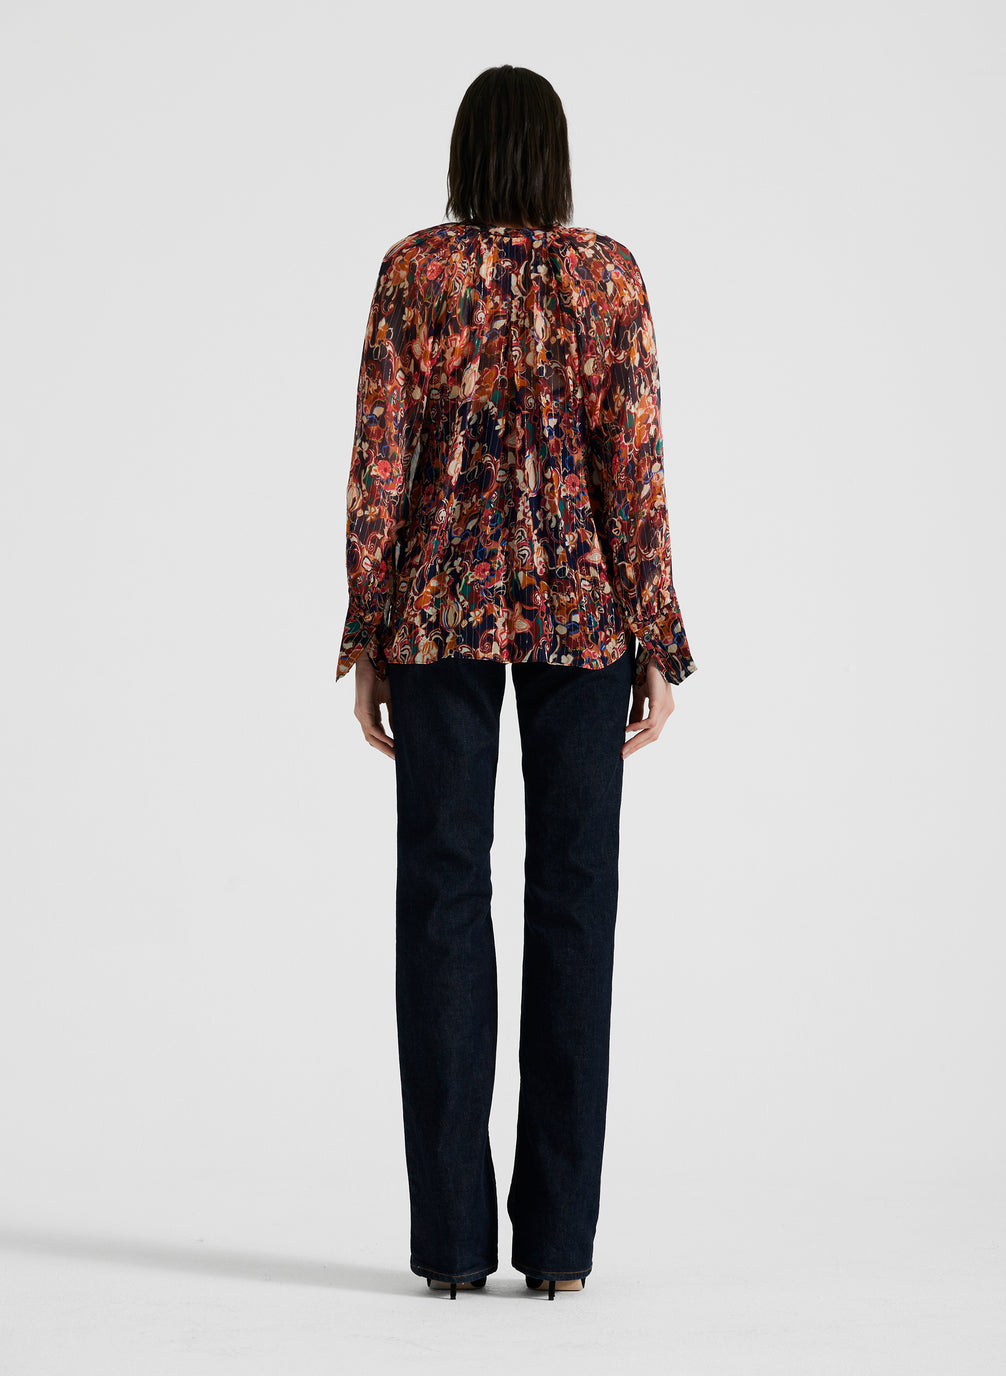 back view of woman wearing silk long sleeve printed blouse and black pants